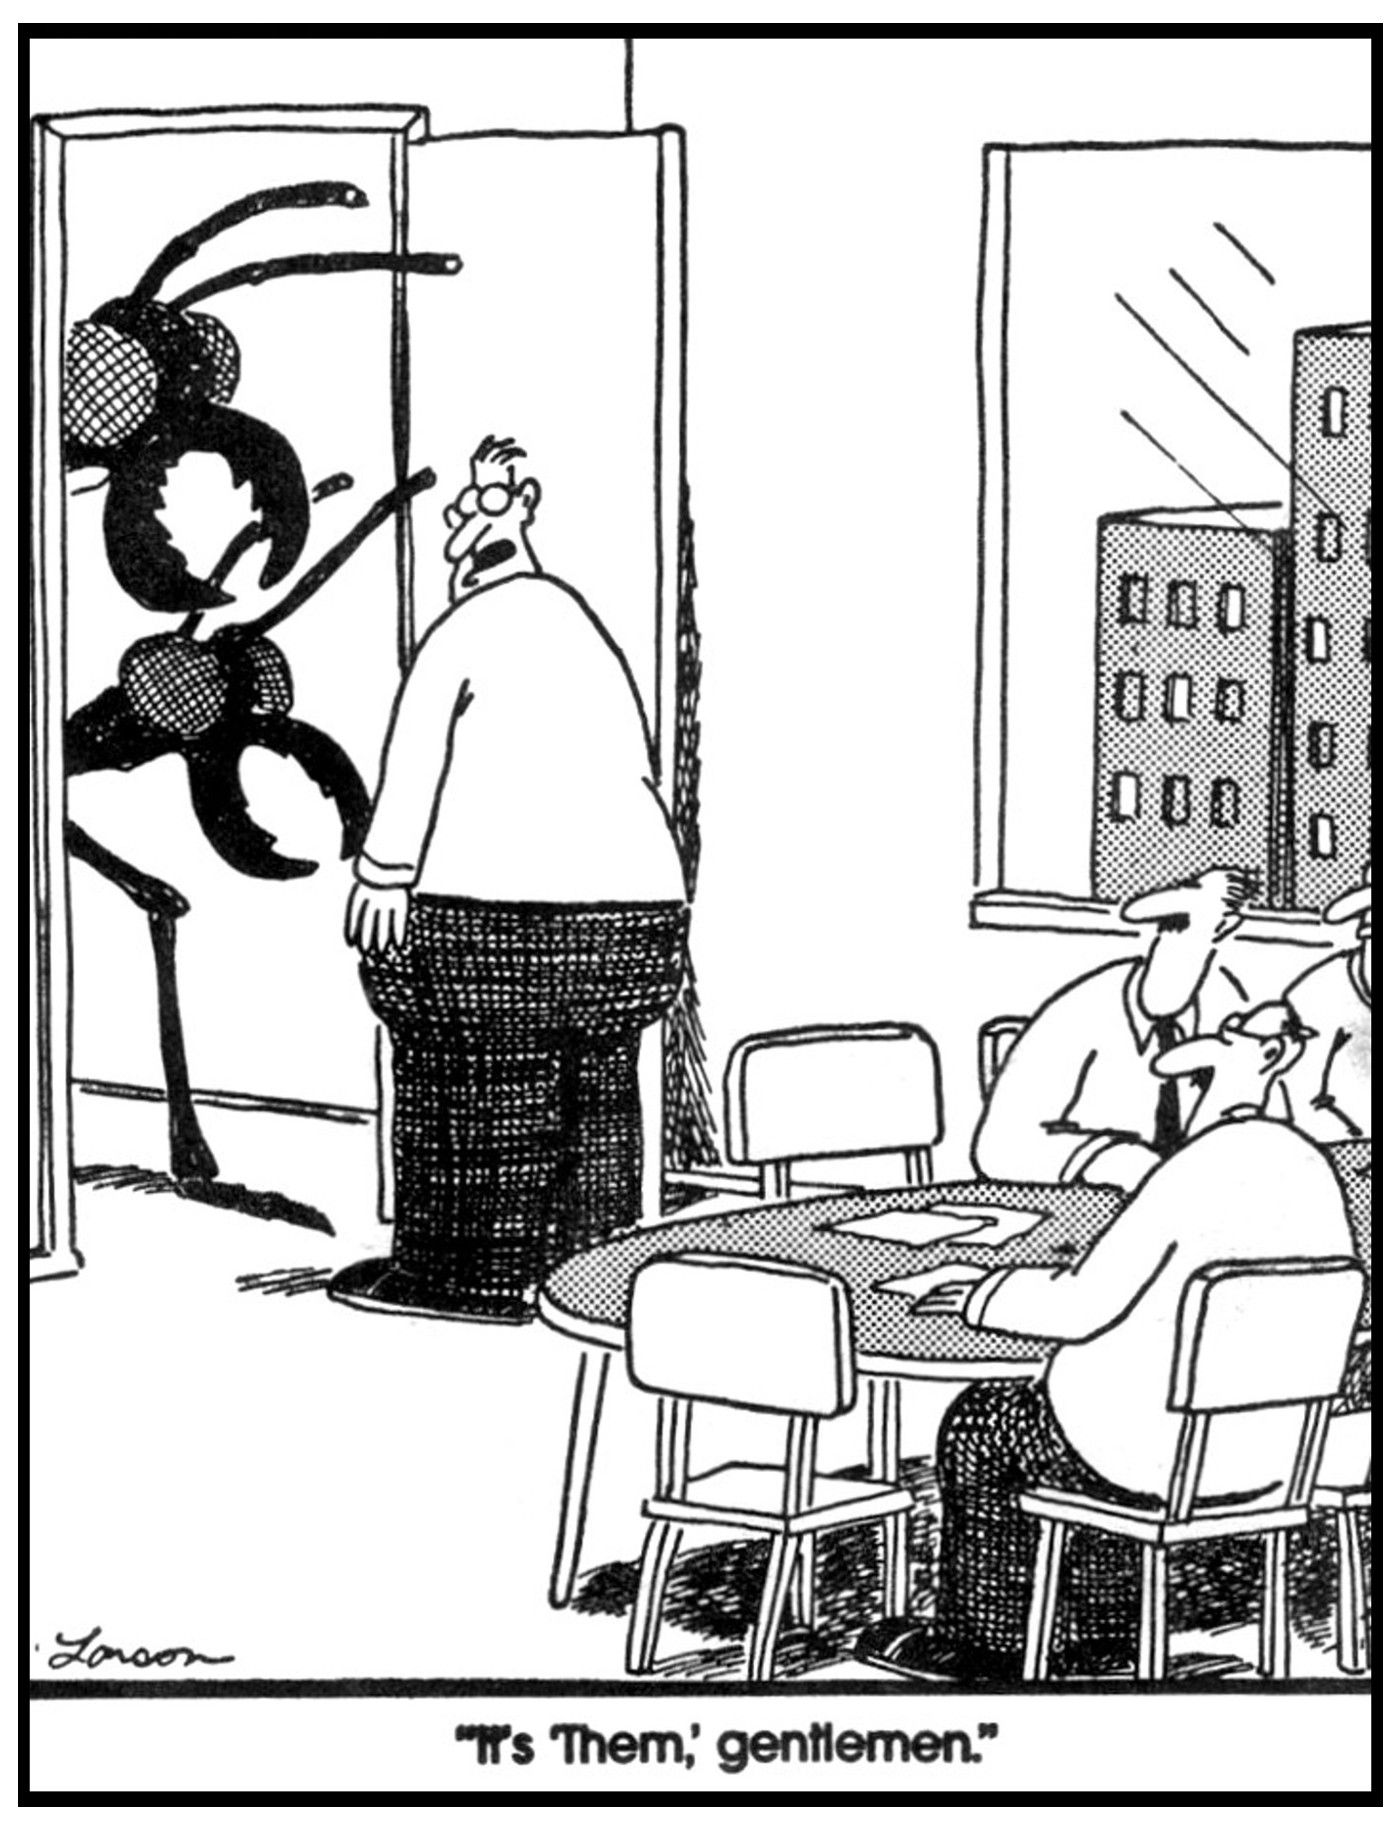 THE FAR SIDE THEM ANTS